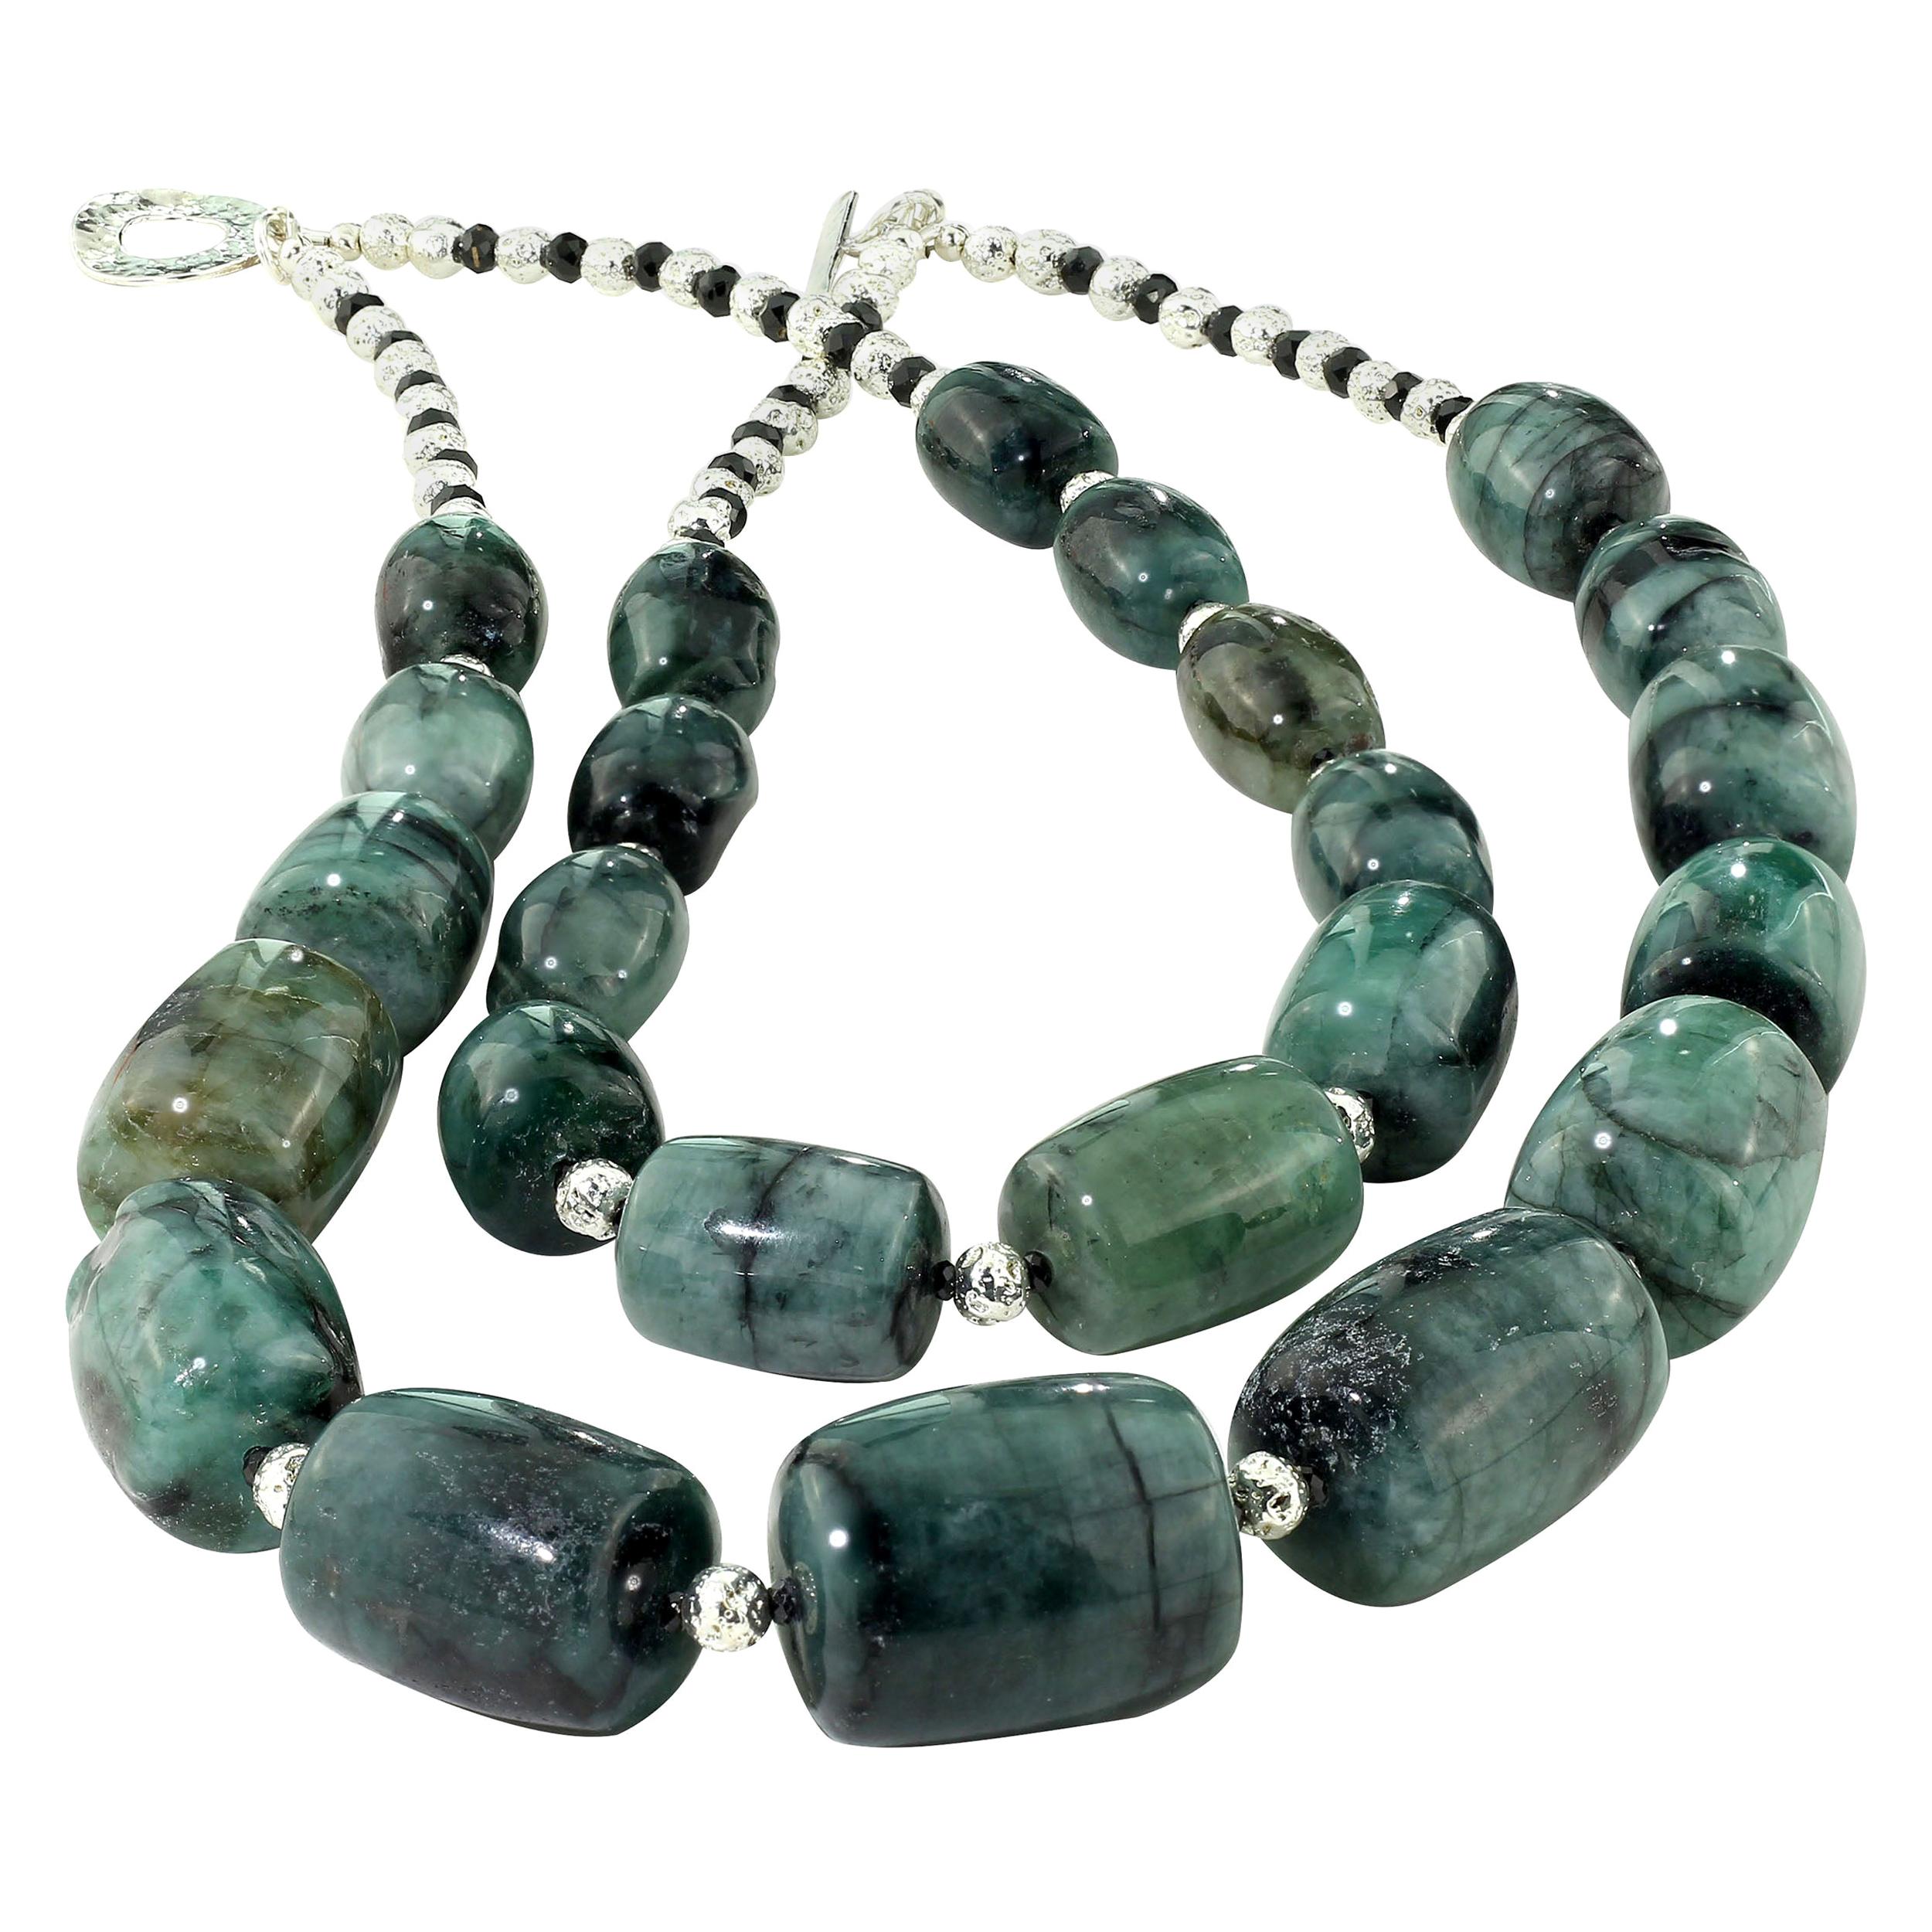 Emerald in matrix double strand necklace with silver and black spinel accents. Stunning graduated barrel shaped Emerald matrix which has a marbled look and a shade of green which will complement whatever you wish to pair it with. This unique